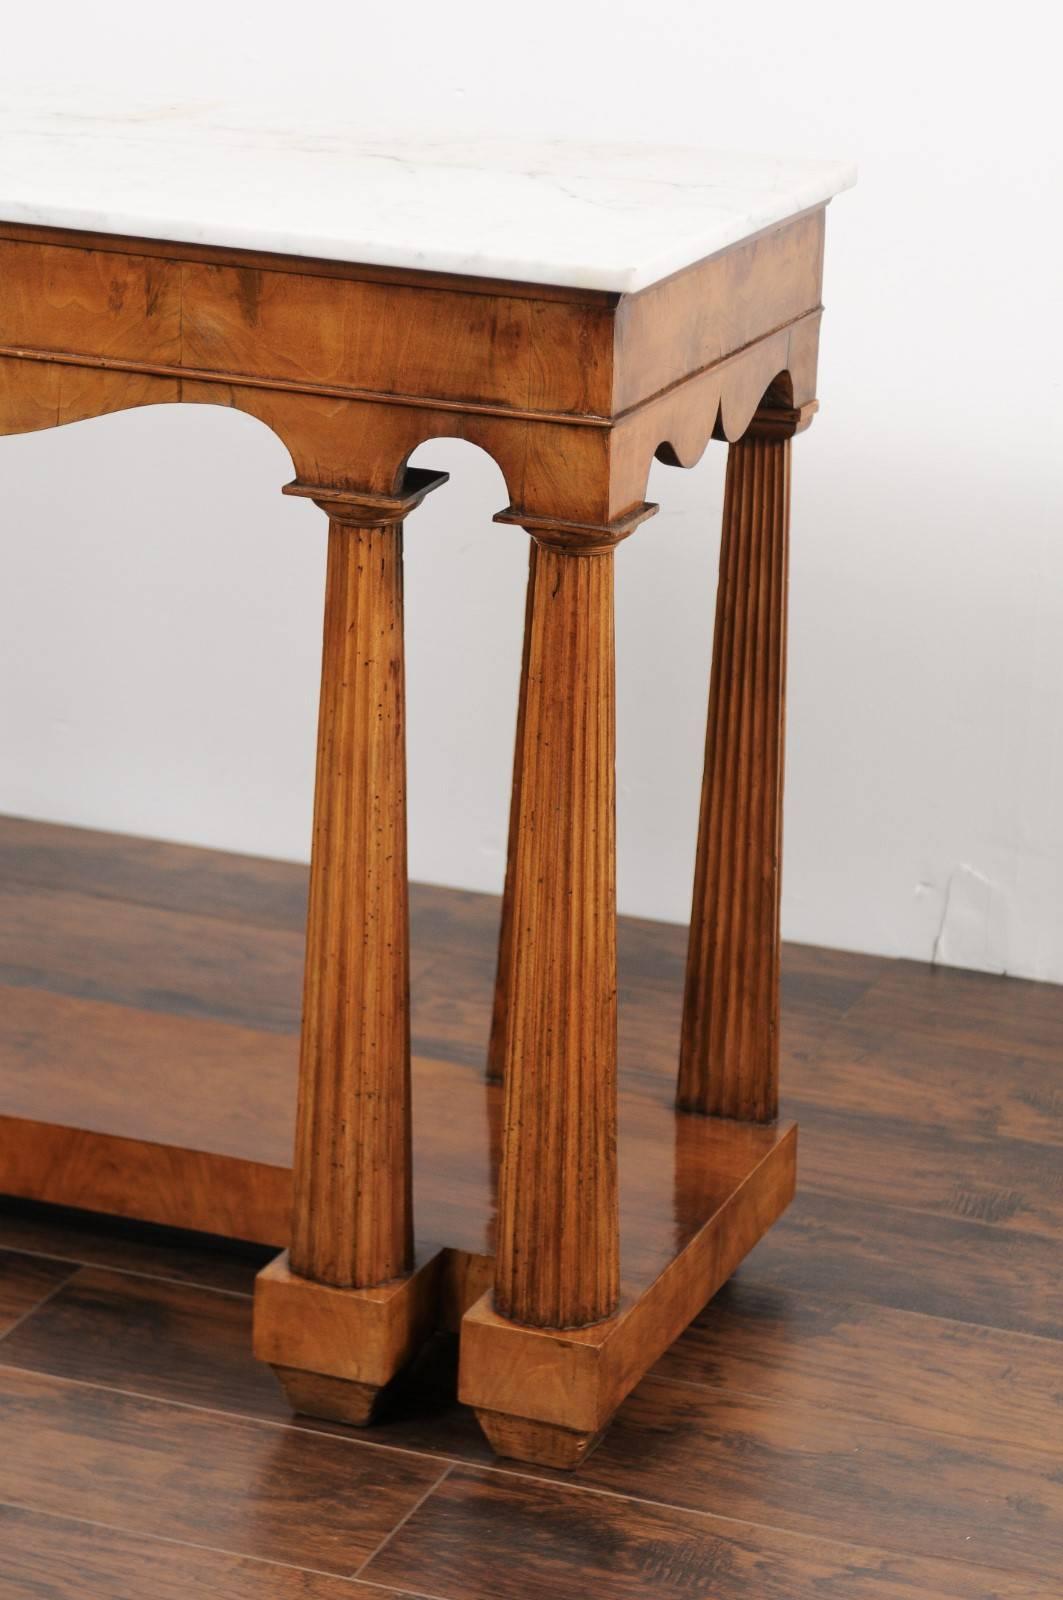 Italian, 1850s Walnut Veneered Console Table with Marble Top and Column Legs 7